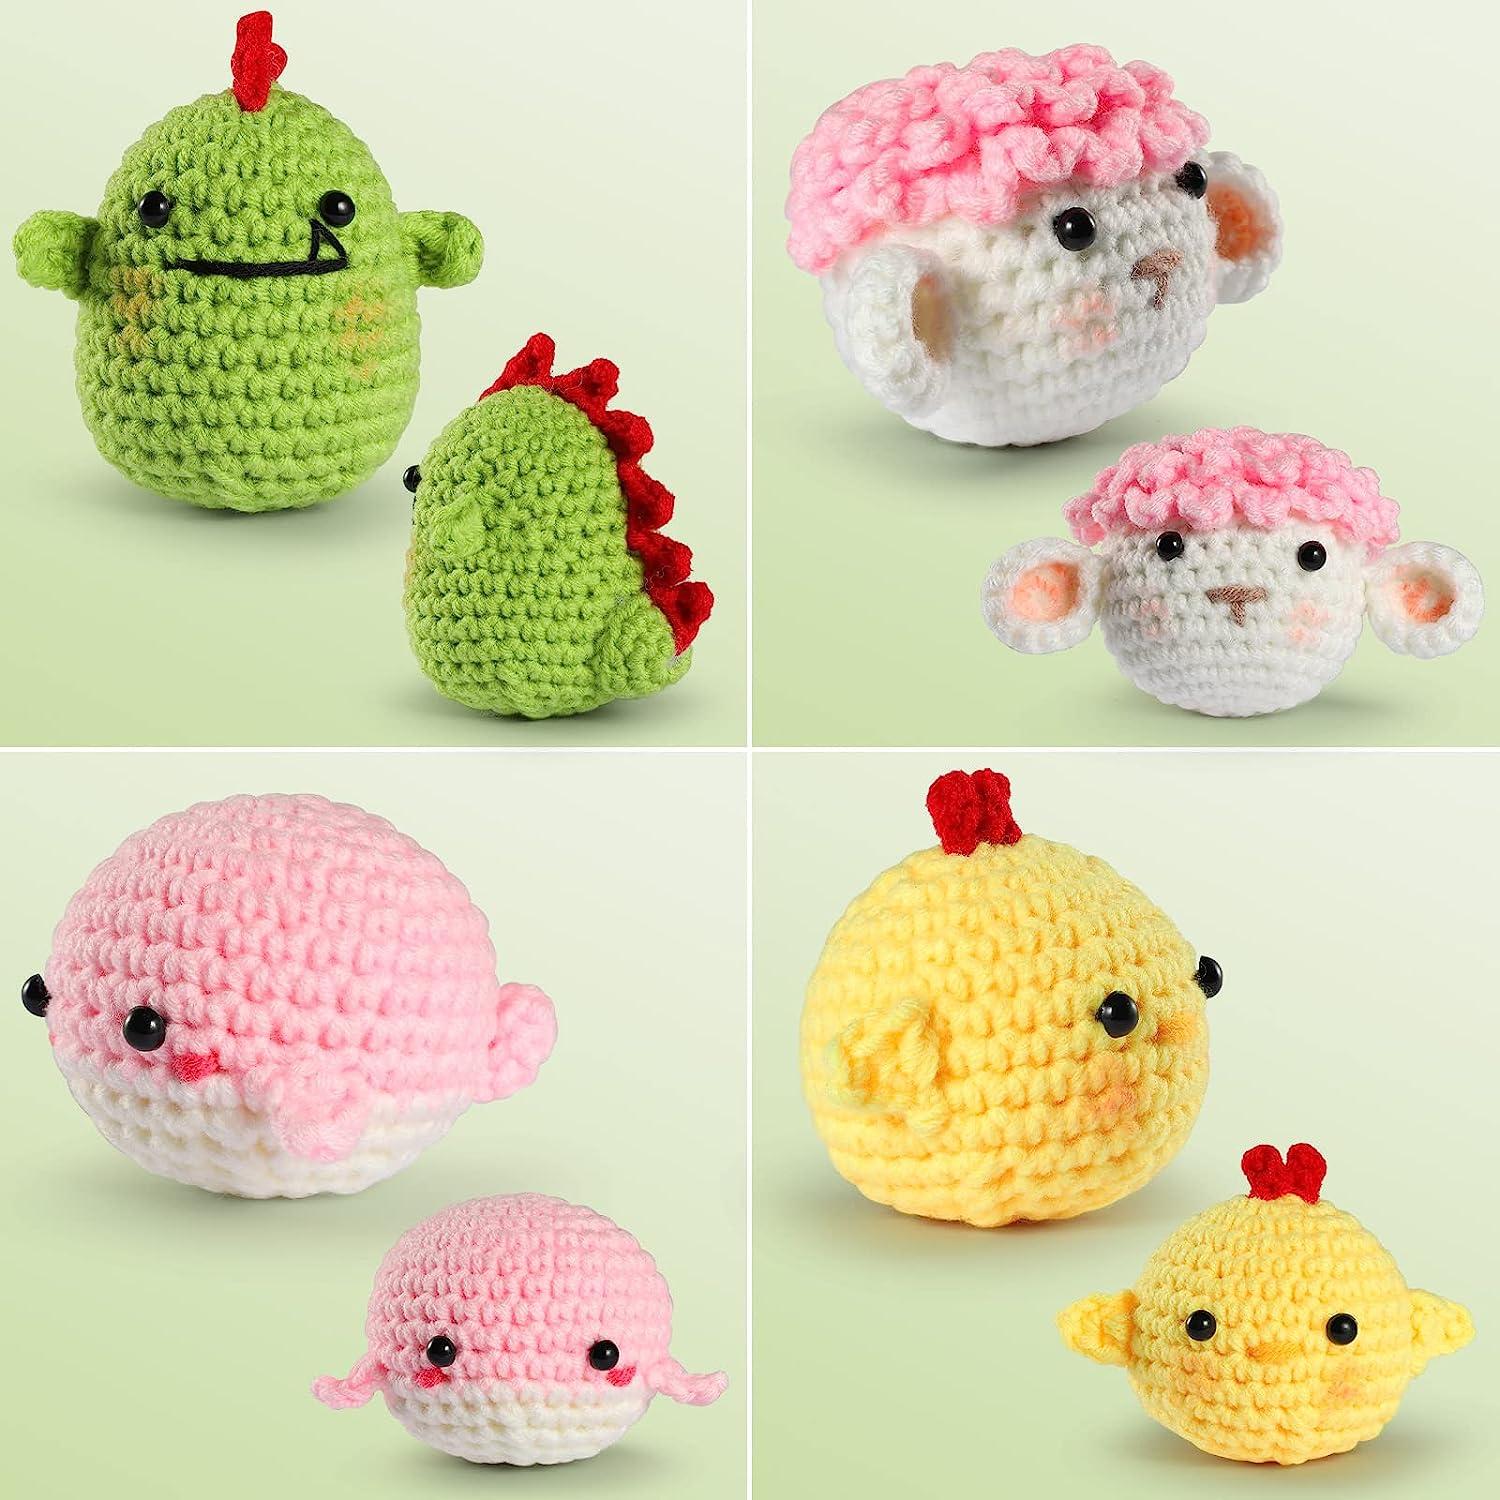  RQWZBCHX Beginners Crochet Kit, 4 Pattern Animals - Pig, Frog,  Whale, Octopus Crochet Set for Starters Adult Kids with Step-by-Step Video  Tutorials and Enough Yarns, Hook, Accessories